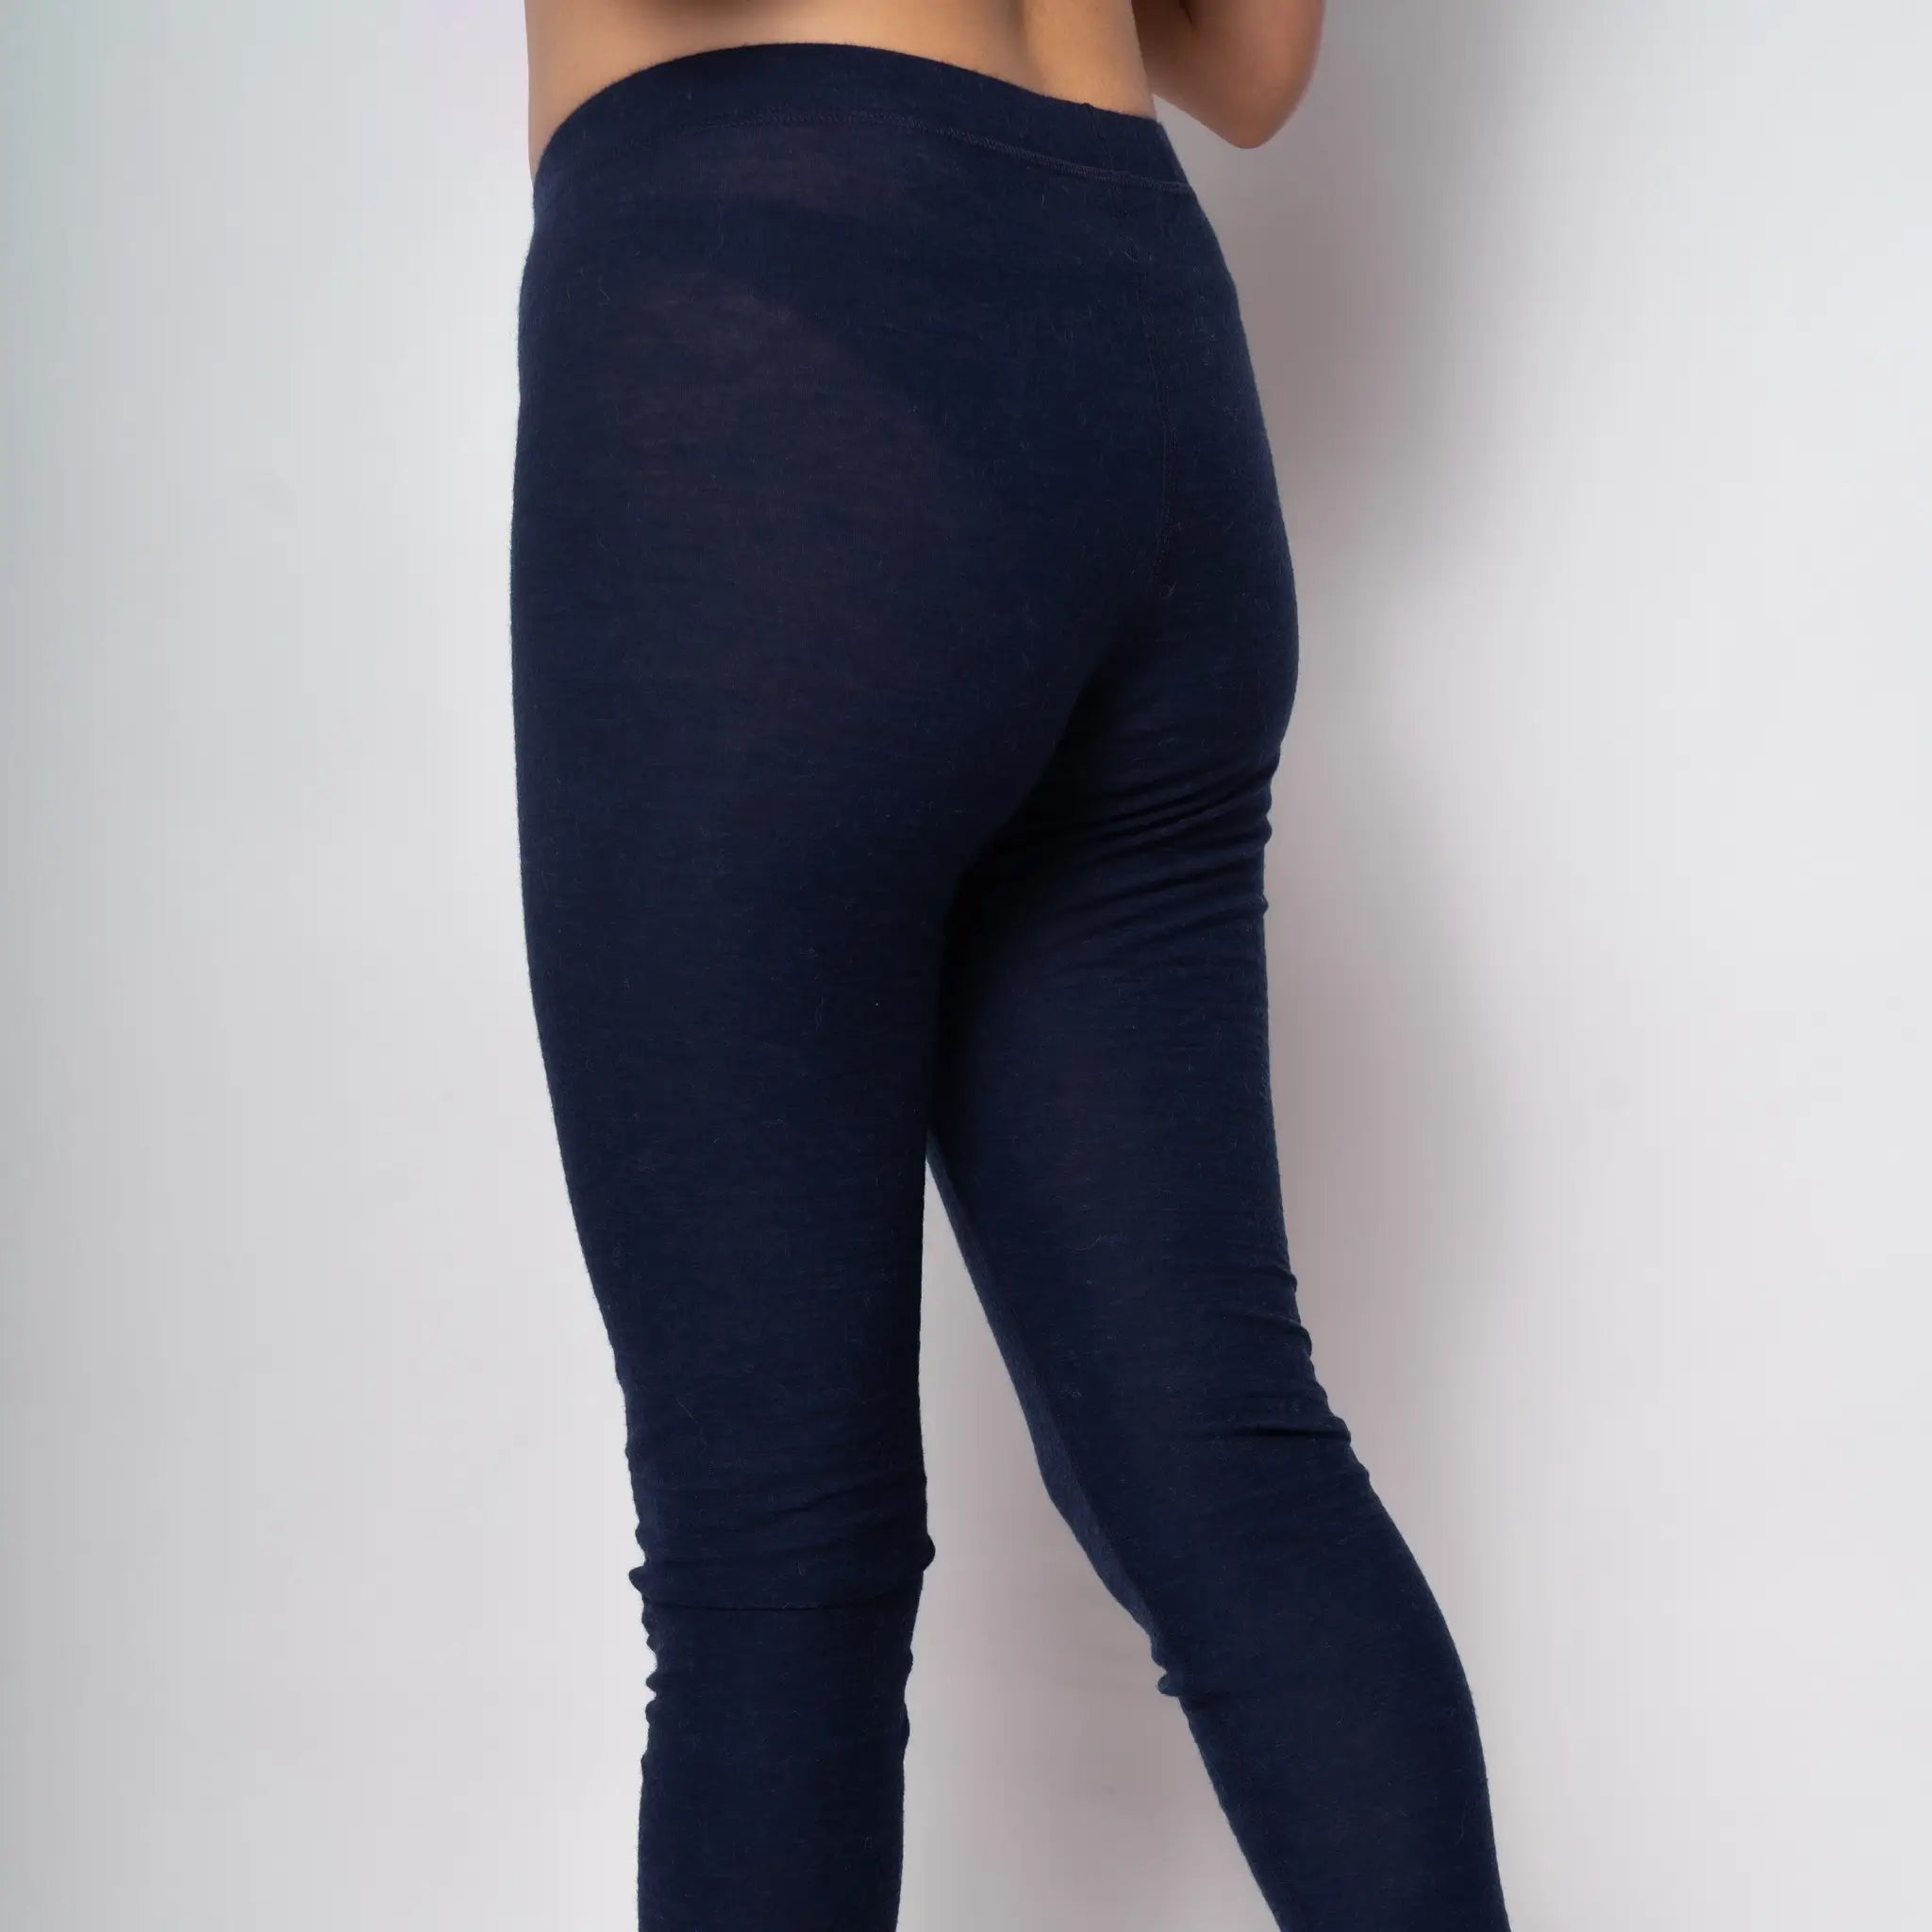 womens leggings ultralight160 highly breathable color navy blue